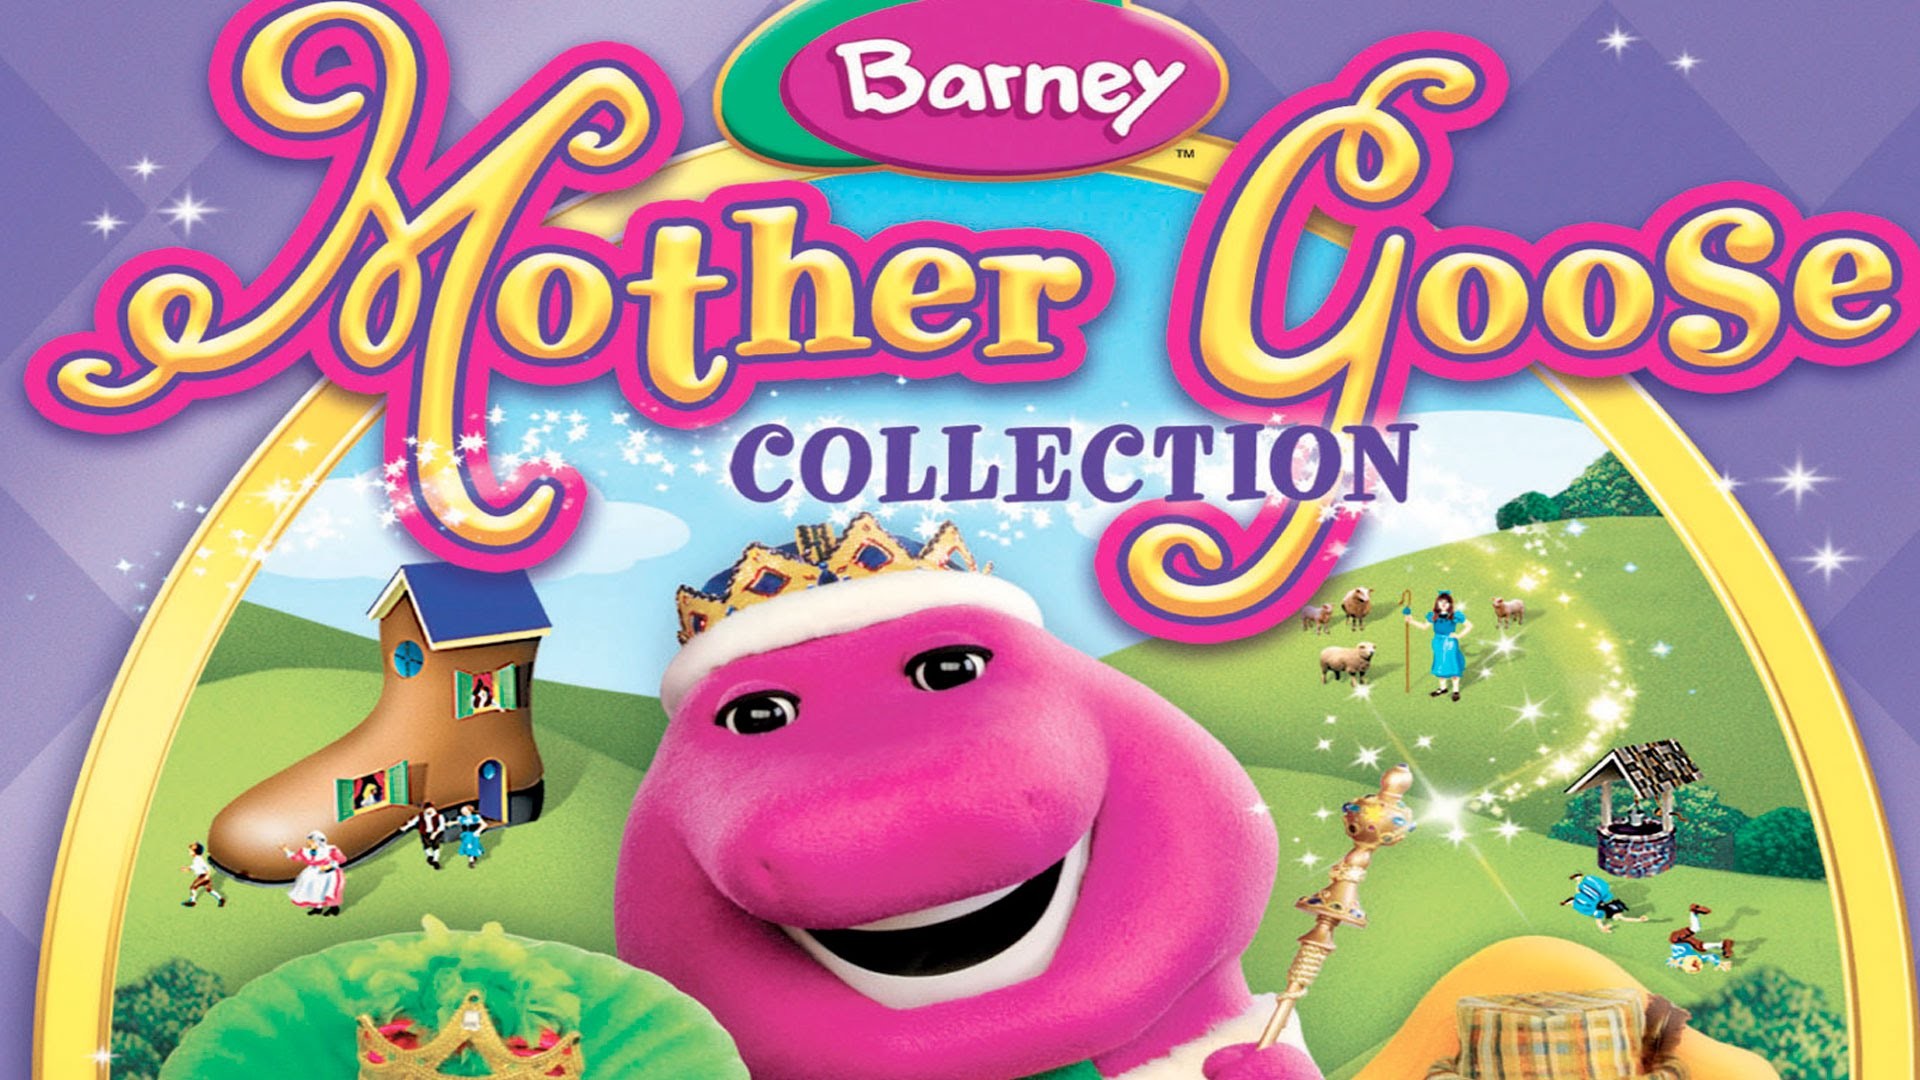 1920x1080 Barney & Friends - Mother Goose